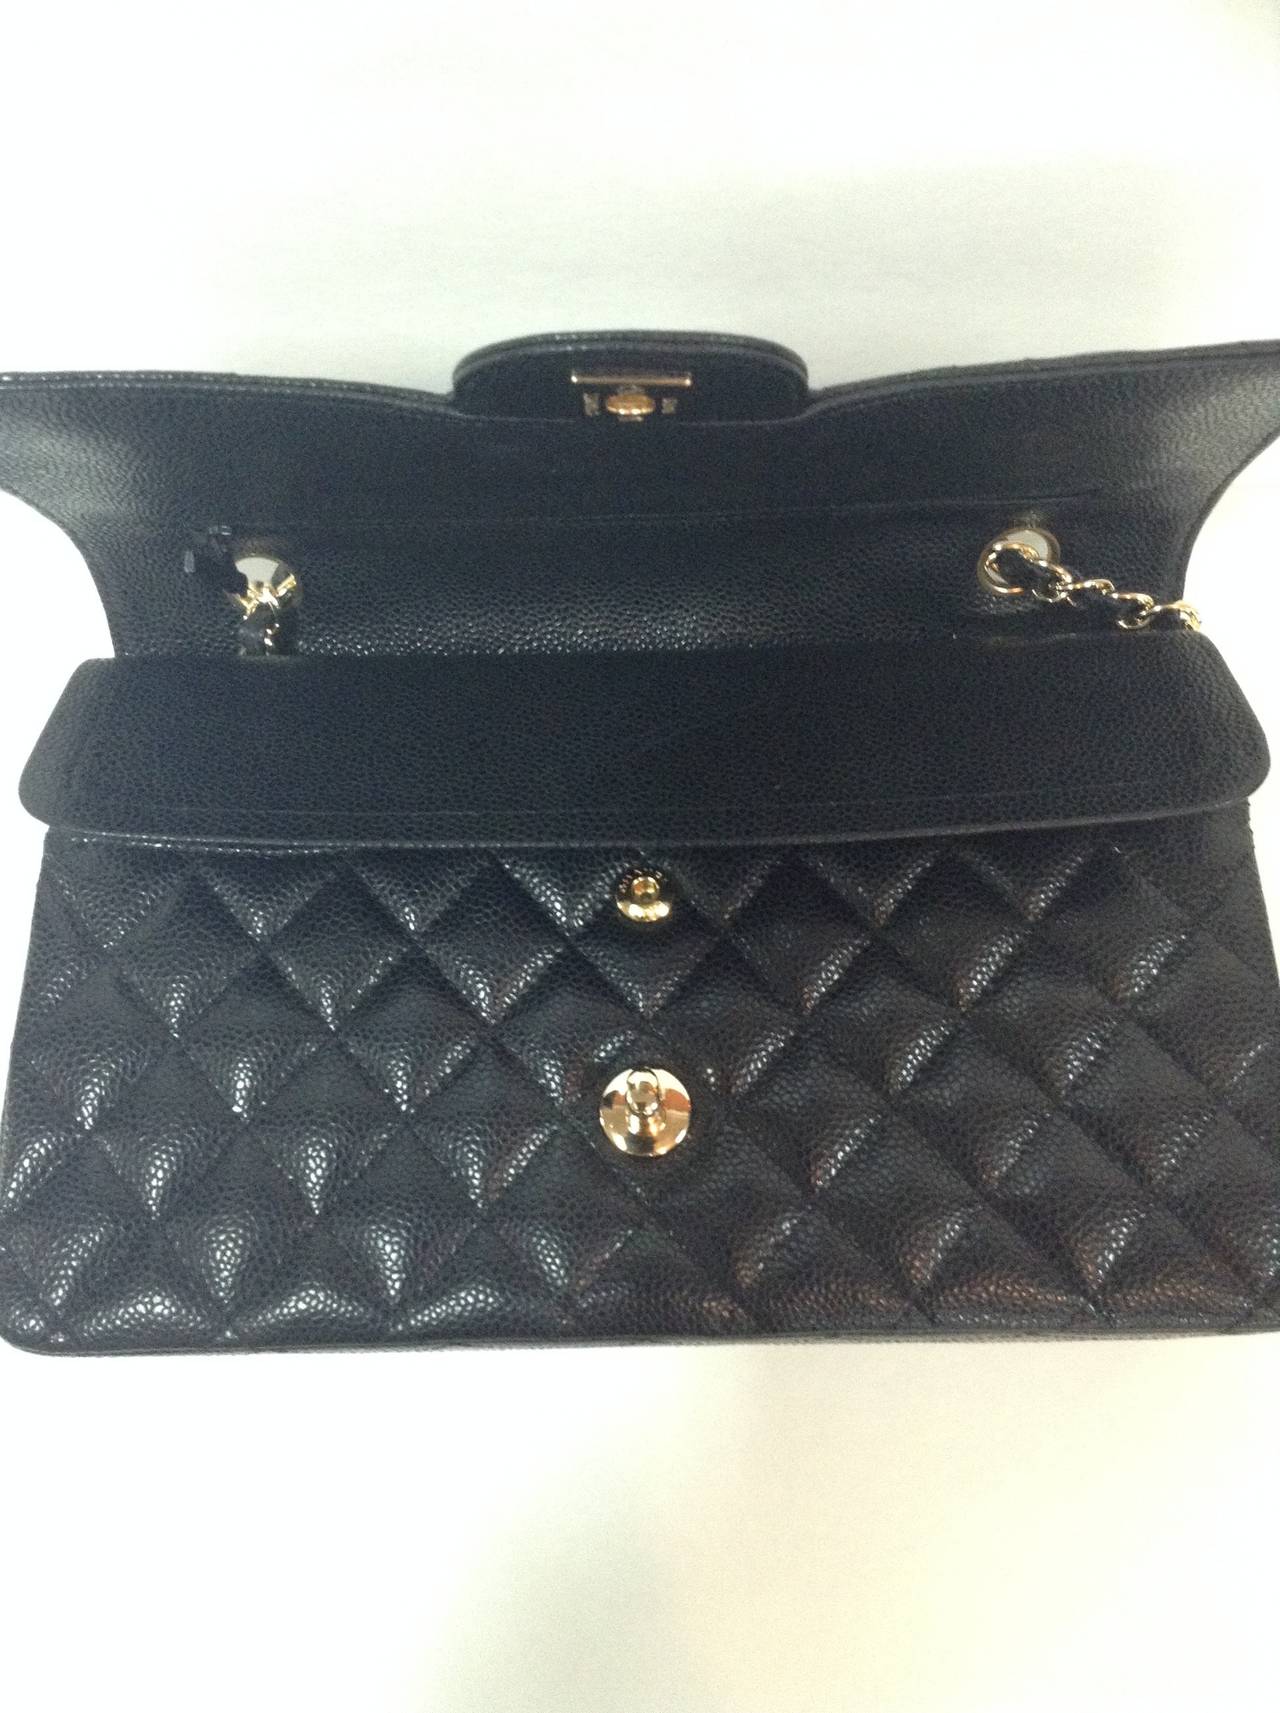 Stunning Refinished and cleaned Chanel Classic Flap bag 
Please note this bad has been Refinished and the lining. this bag was sent out to Leather Surgeon to be verified and clean 
comes as is 
( no box - no Code - No duster bag )
This bag was